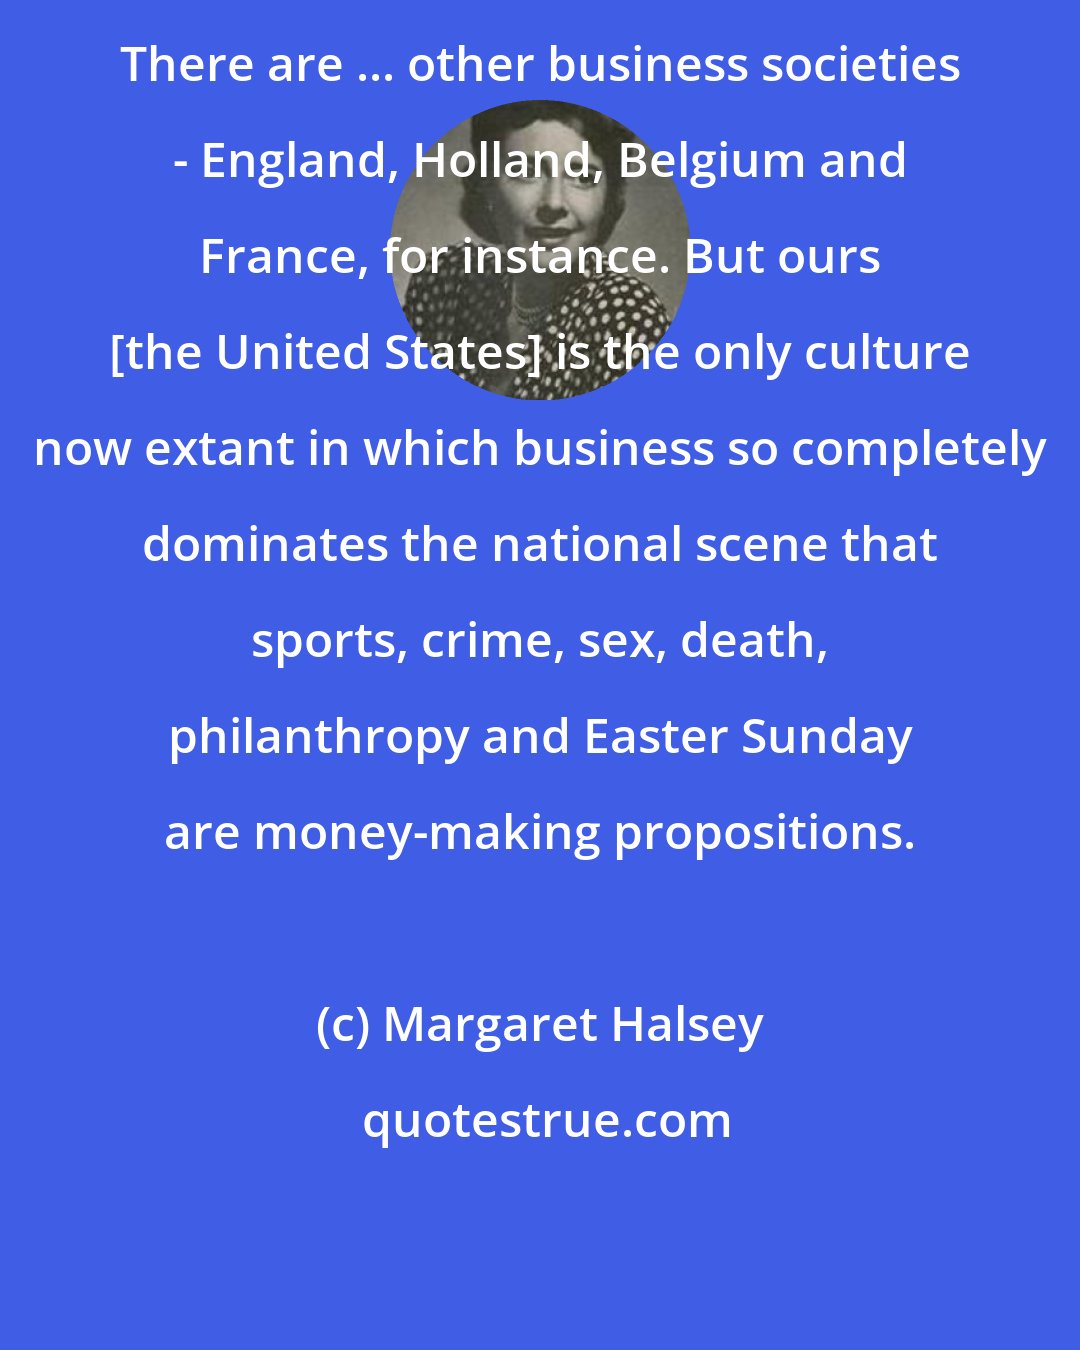 Margaret Halsey: There are ... other business societies - England, Holland, Belgium and France, for instance. But ours [the United States] is the only culture now extant in which business so completely dominates the national scene that sports, crime, sex, death, philanthropy and Easter Sunday are money-making propositions.